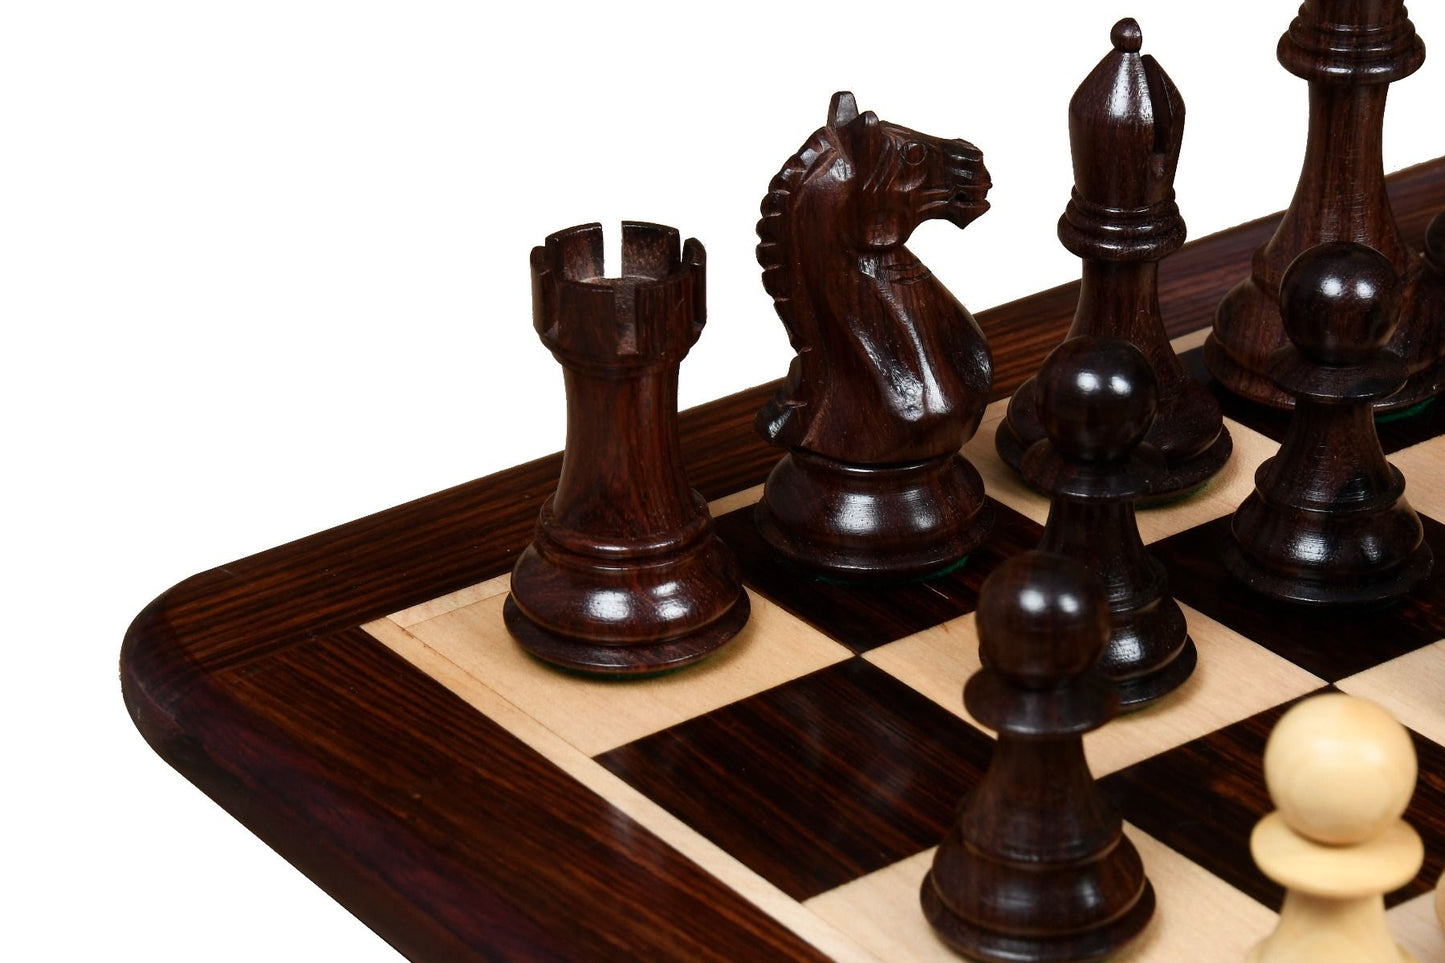 COMBO OF FIERCE KNIGHT STAUNTON SERIES CHESS PIECES IN ROSEWOOD & BOX WOOD - 4.1" KING WITH WOODEN CHESS BOARD -  21"